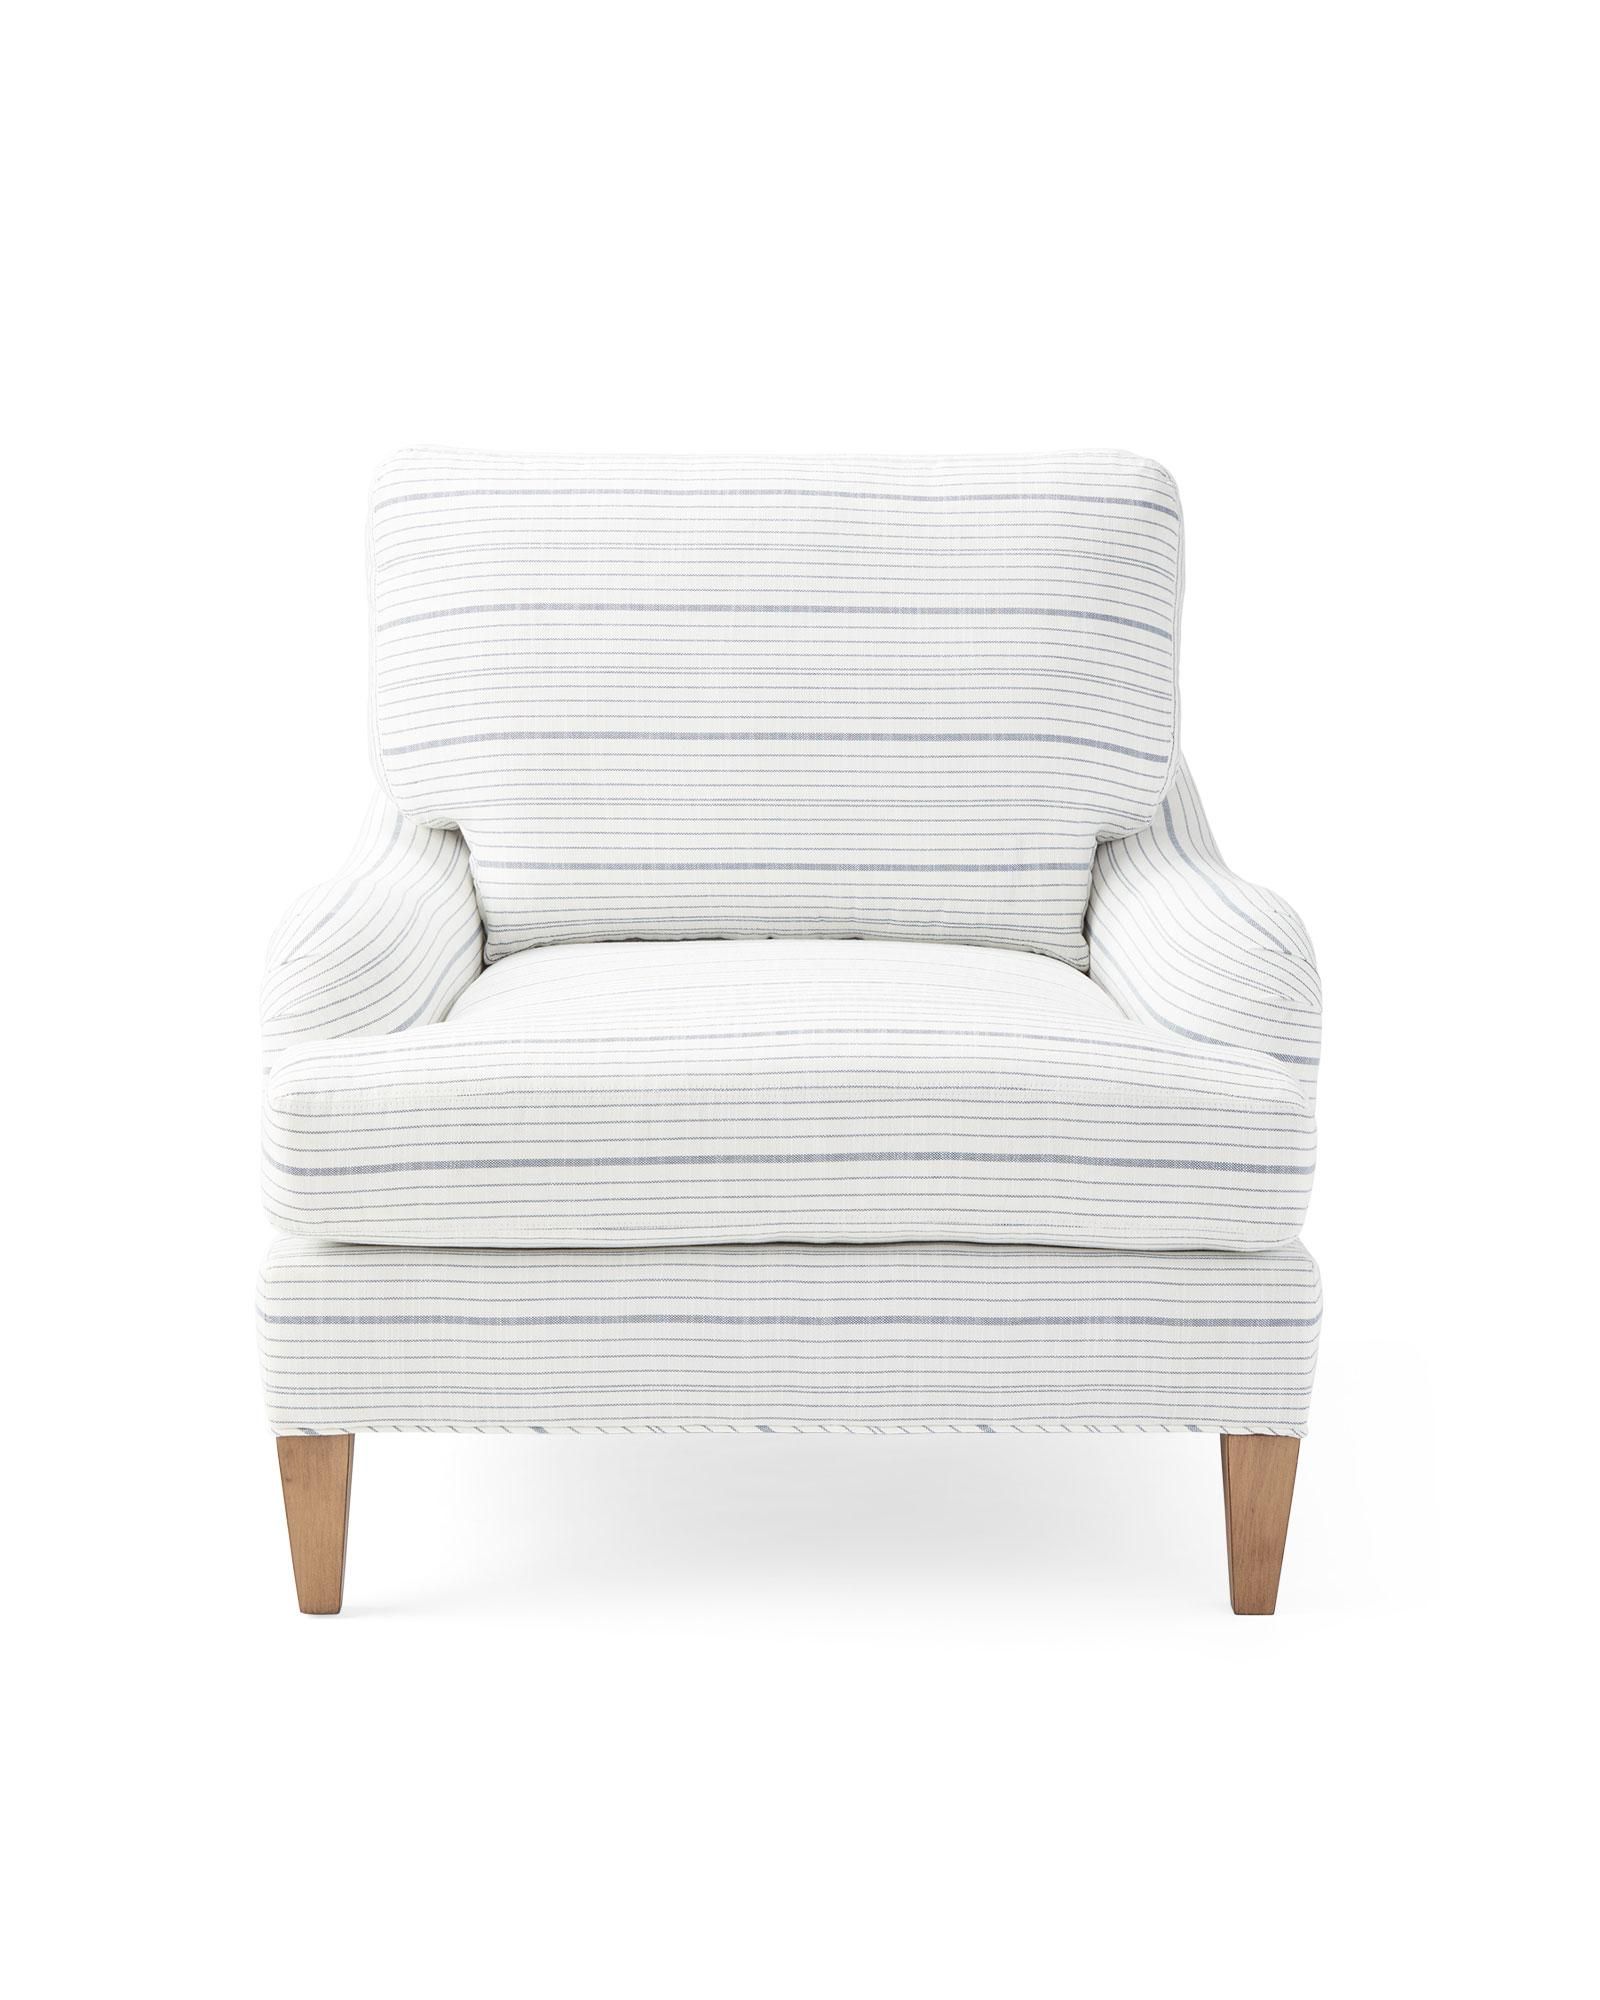 Hanover Chair - S&L Performance Navy Surf Stripe | Serena and Lily